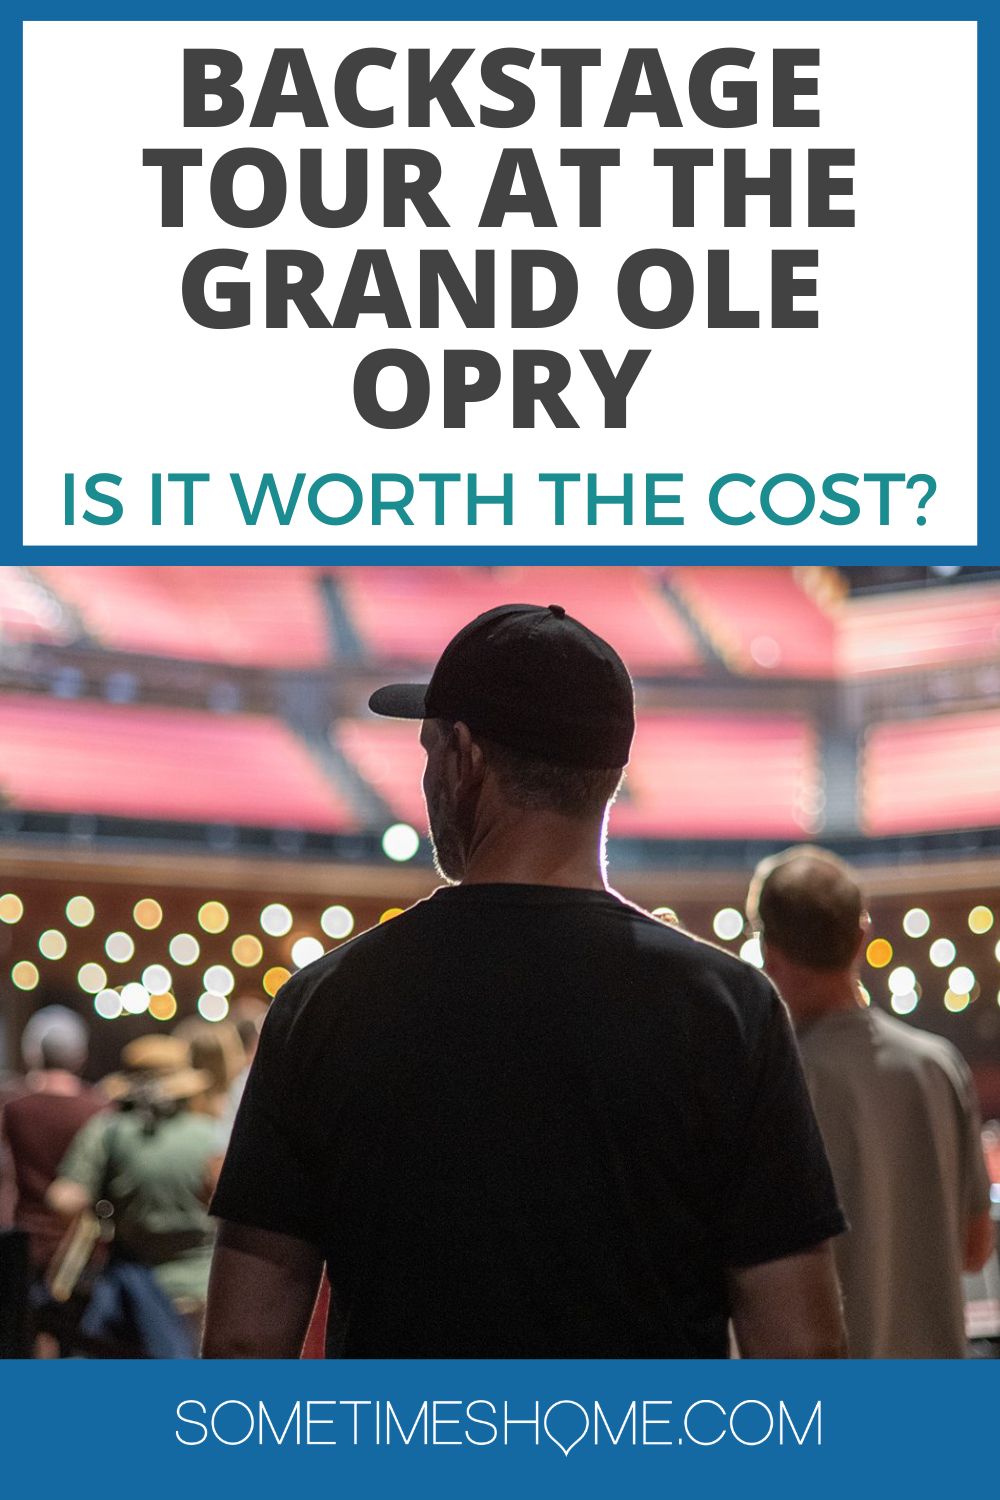 Backstage Tour at the Grand Ole Opry: Is it Worth the Cost? with a picture of the silhouette of man with theater seating and lights.